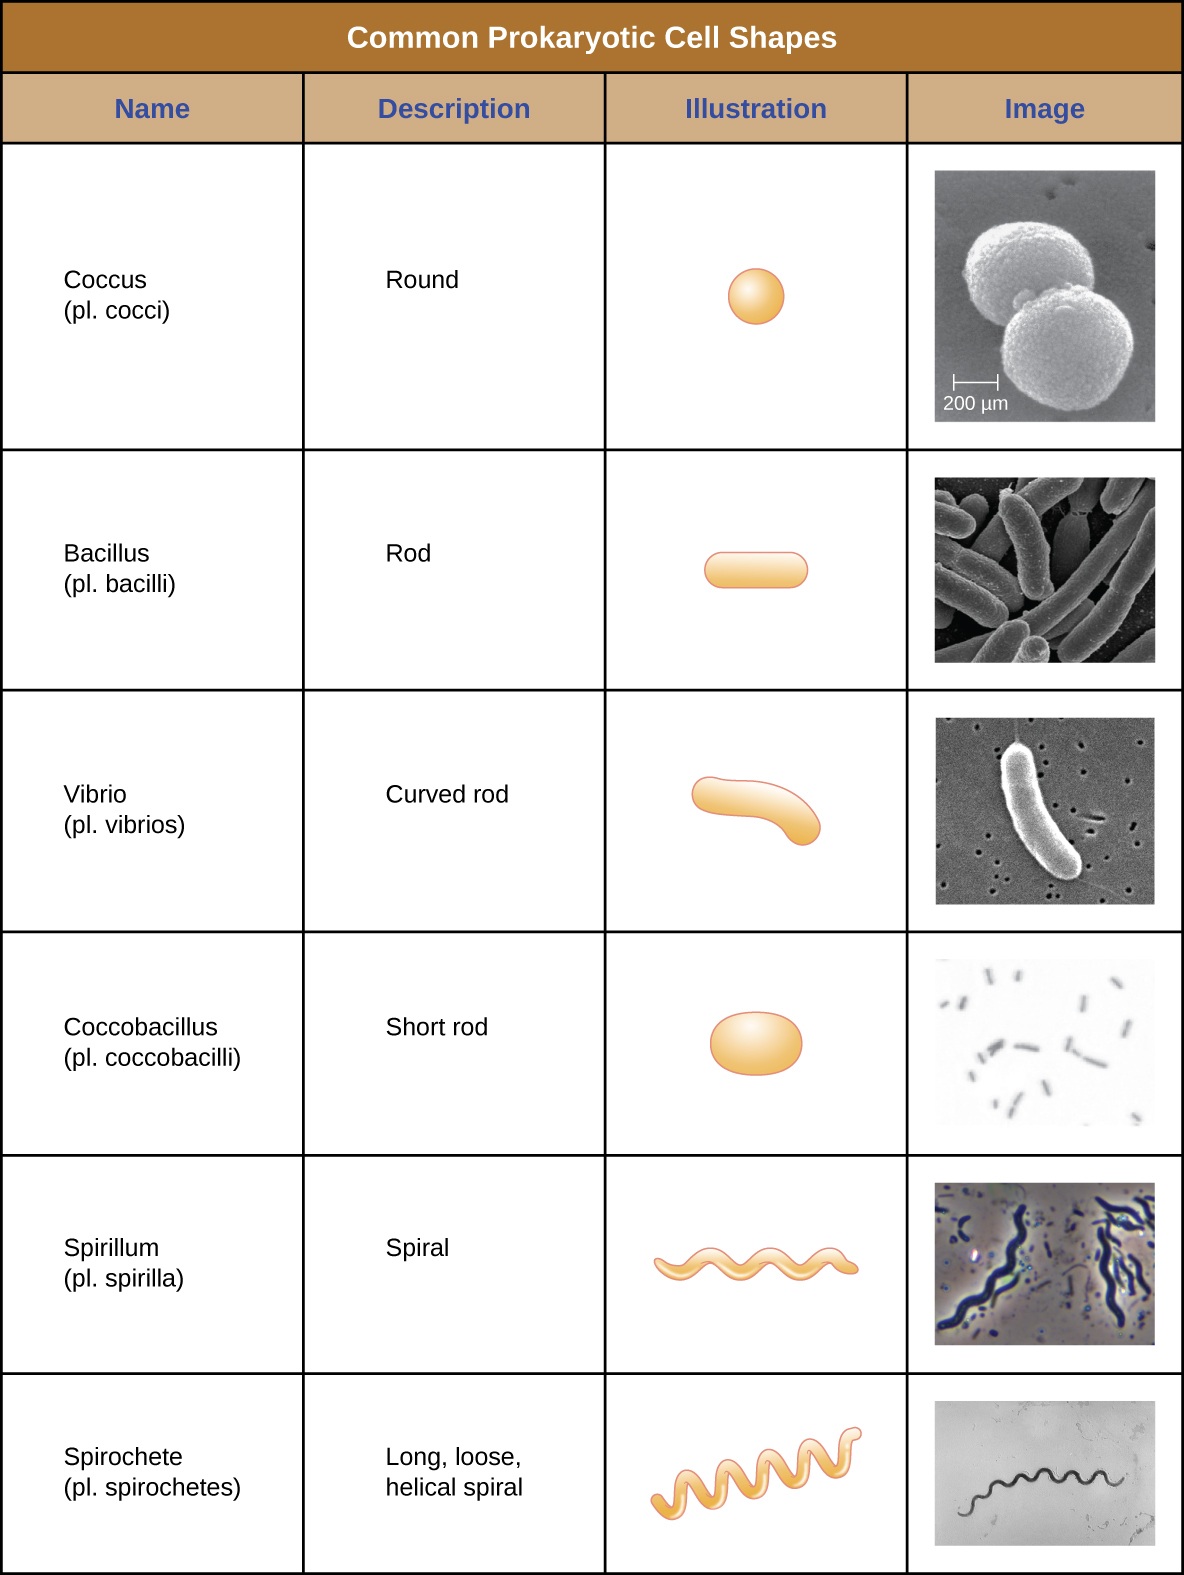 Common Prokaryotic Cell Shapes. The term Coccus (plural: cocci) is the name given to round, spherical shapes. The term bacillus (plural: bacilli) is the name given to rod shaped cells. These cells are shaped like long rounded rectangles. The term vibrio (plural vibrios) is the name given to curved rods, these cells have a shape like a long comma. The term coccobacillus (plural coccobacilli) is the name for short rods; these cells look like ovals. The term spirillum (plural spirilla) is the name for long spiral cells; these look like cork screws. The term spirochete (plural spirochetes) is the name for long, loose helical spiral shaped cells. These look similar to the spirillum but are more floppy.